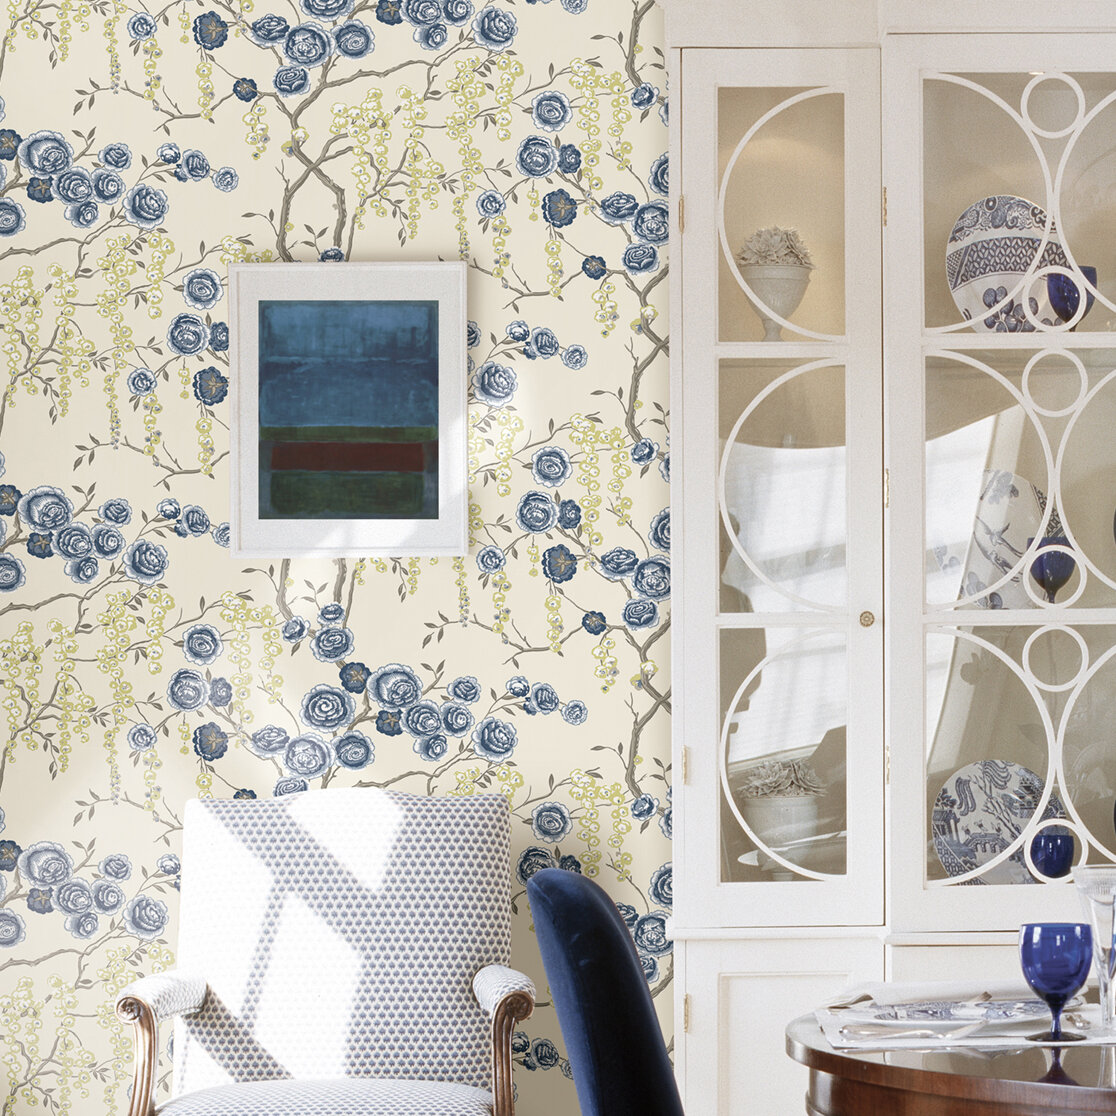 THE SACRED TREE Wallpaper - Painterly Florals - Sale - Products